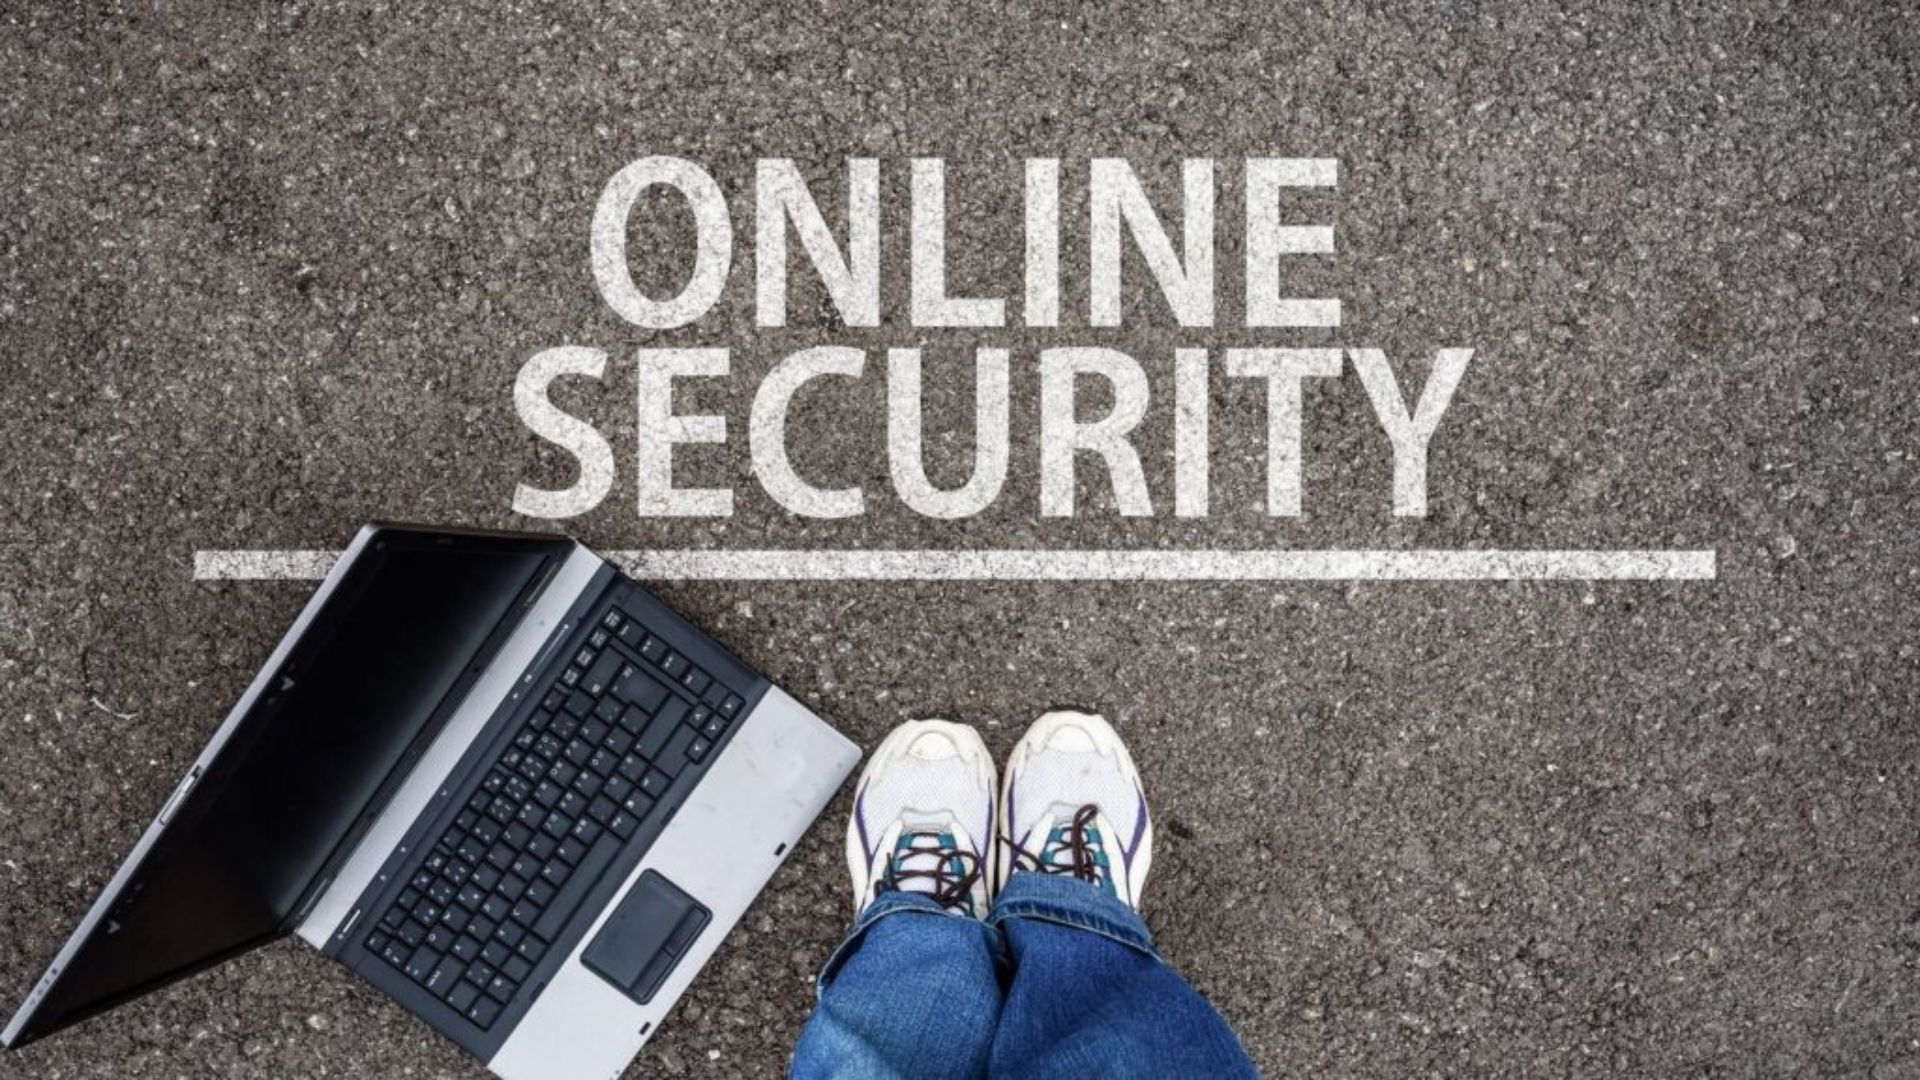 Easy Steps to Improve Your Online Security